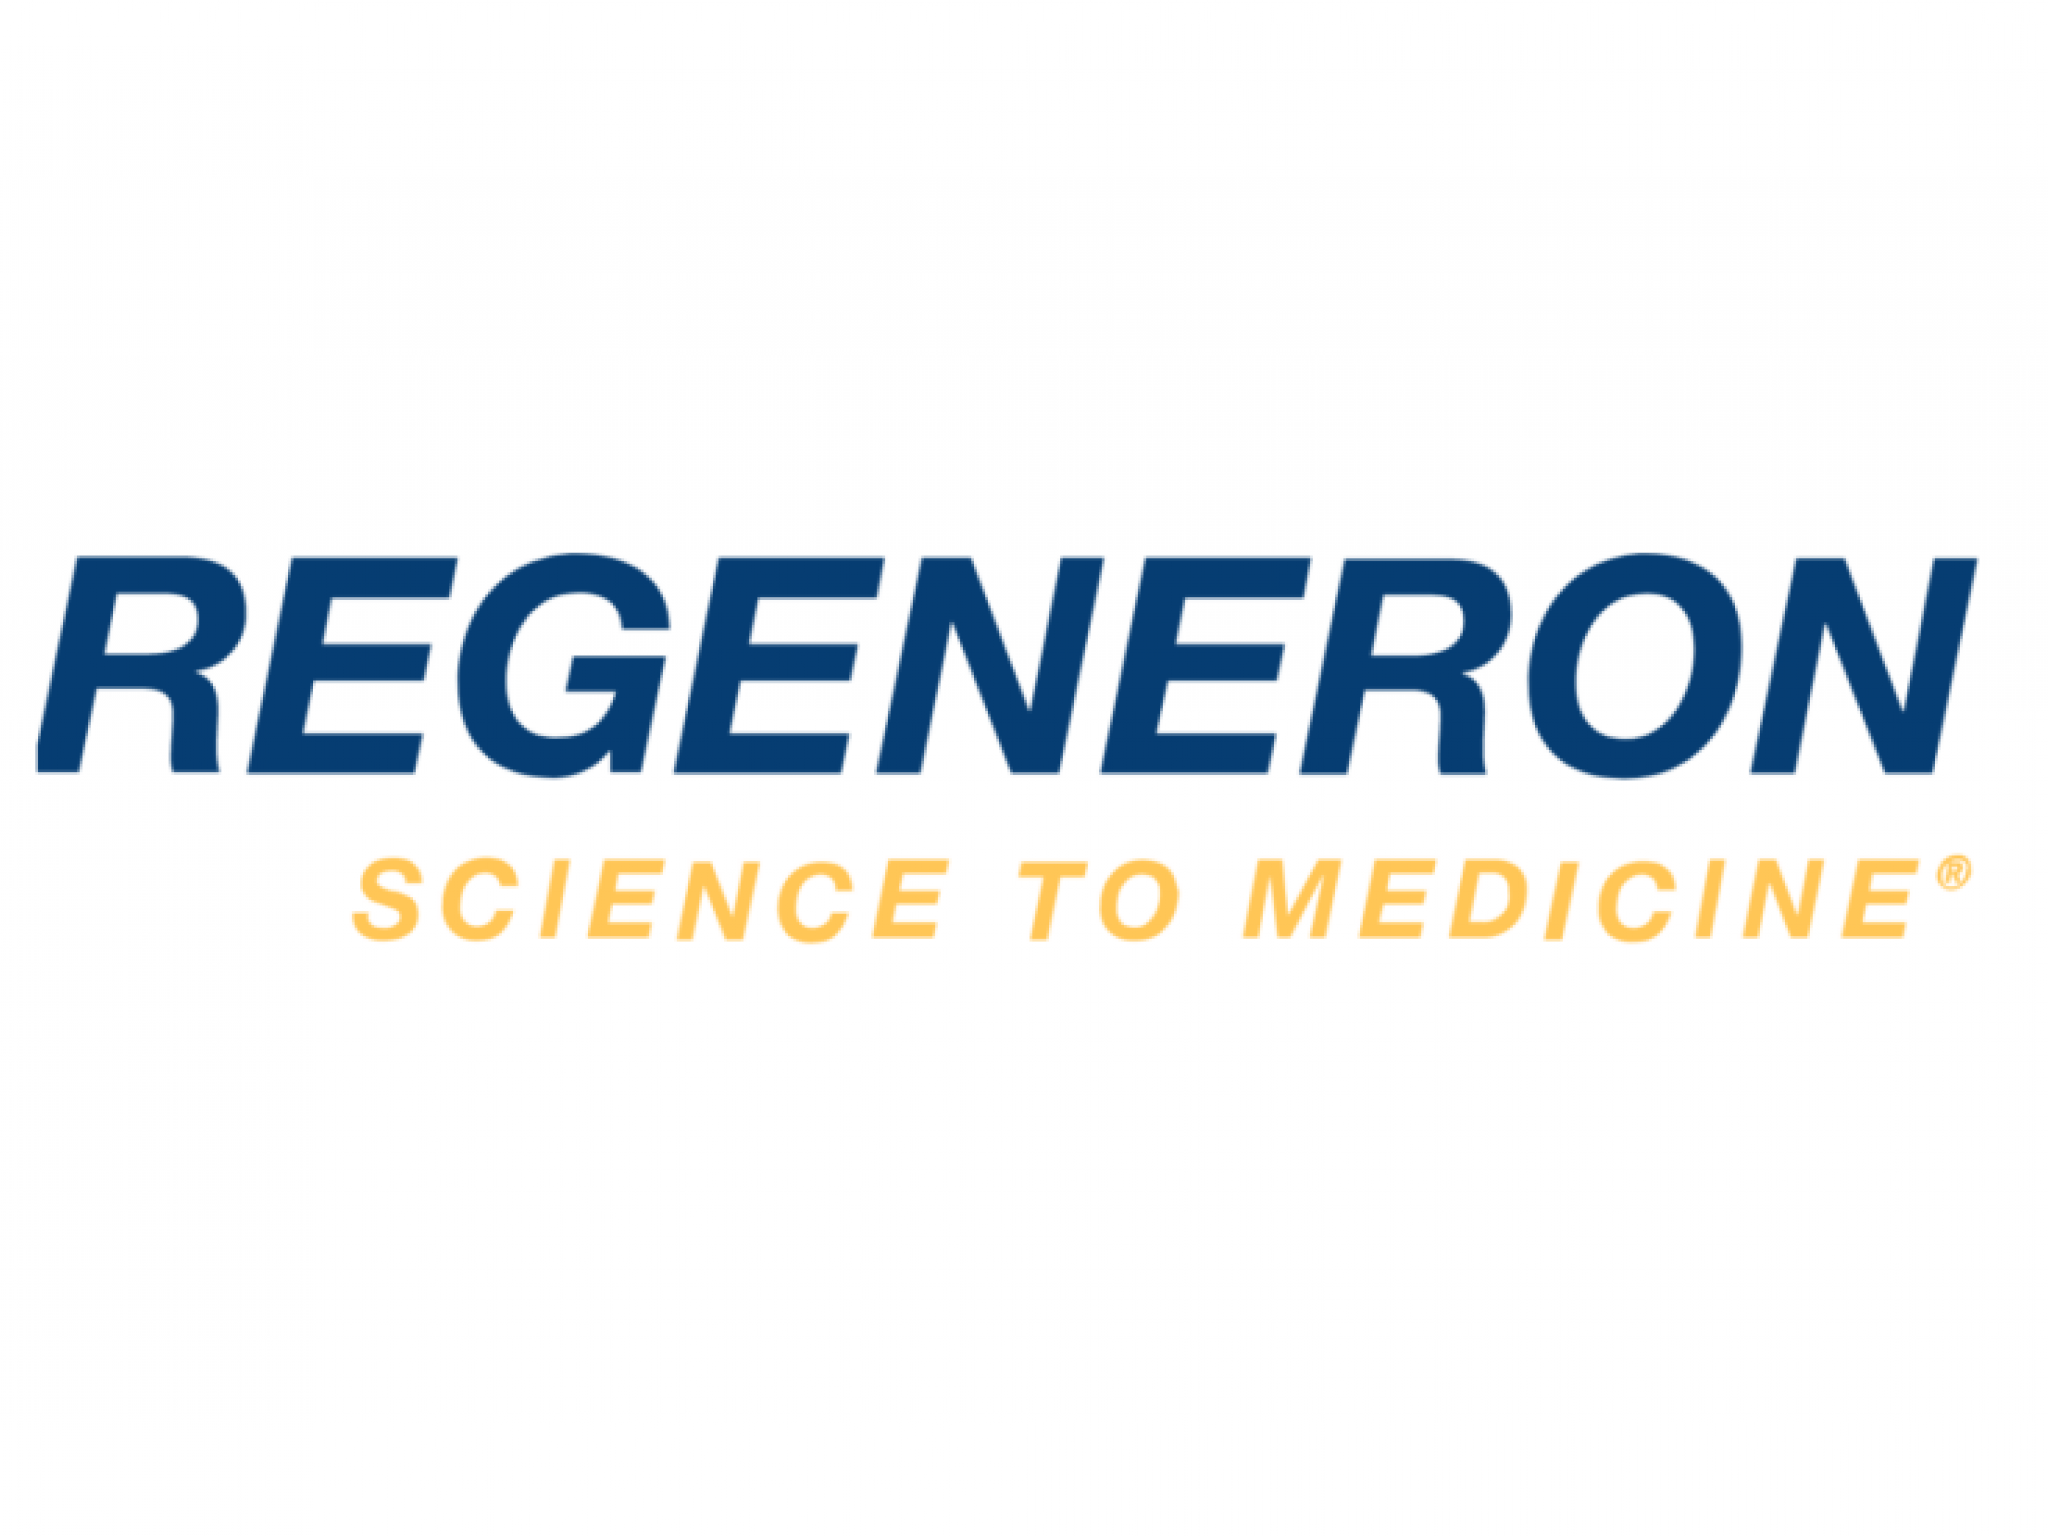  whats-going-on-with-regeneron-pharmaceuticals-stock-on-friday 